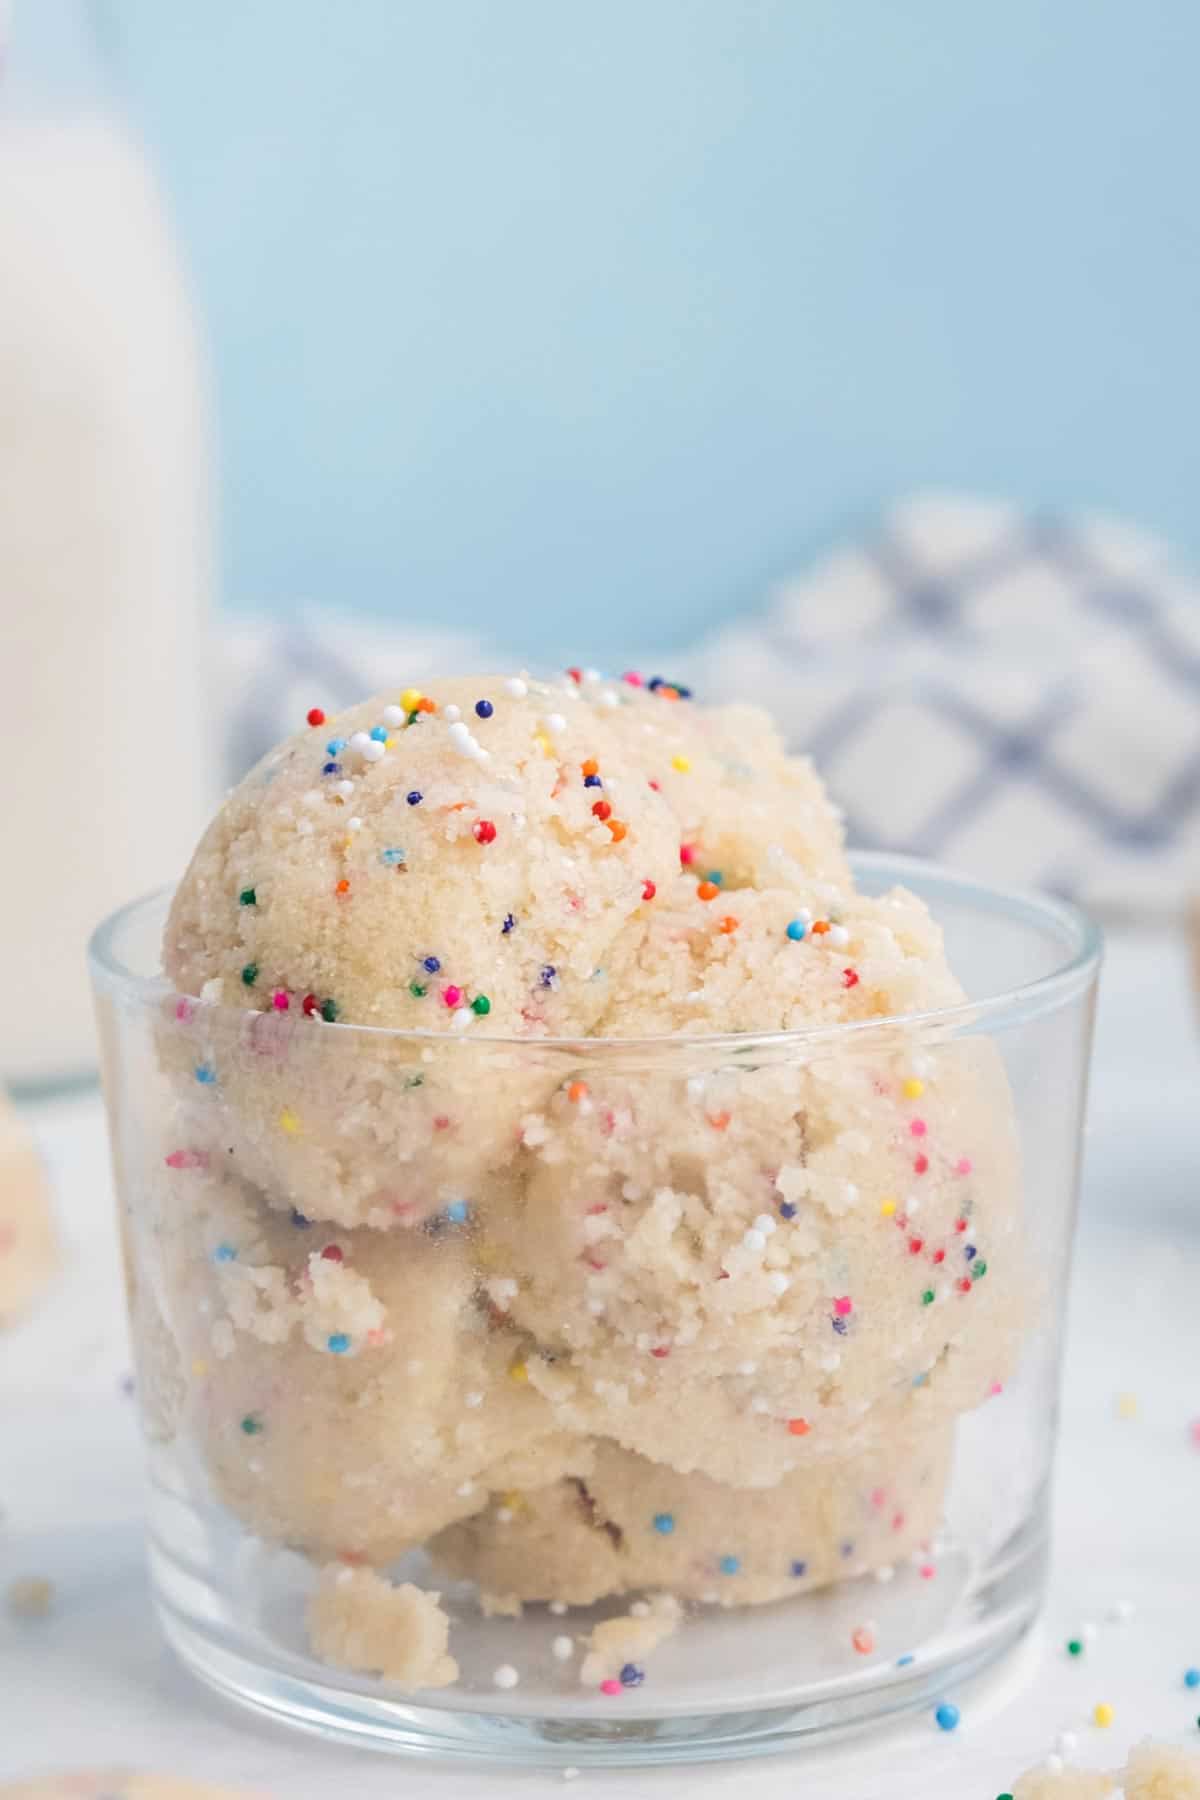 Scoops of edible dough with sprinkles in a glass.